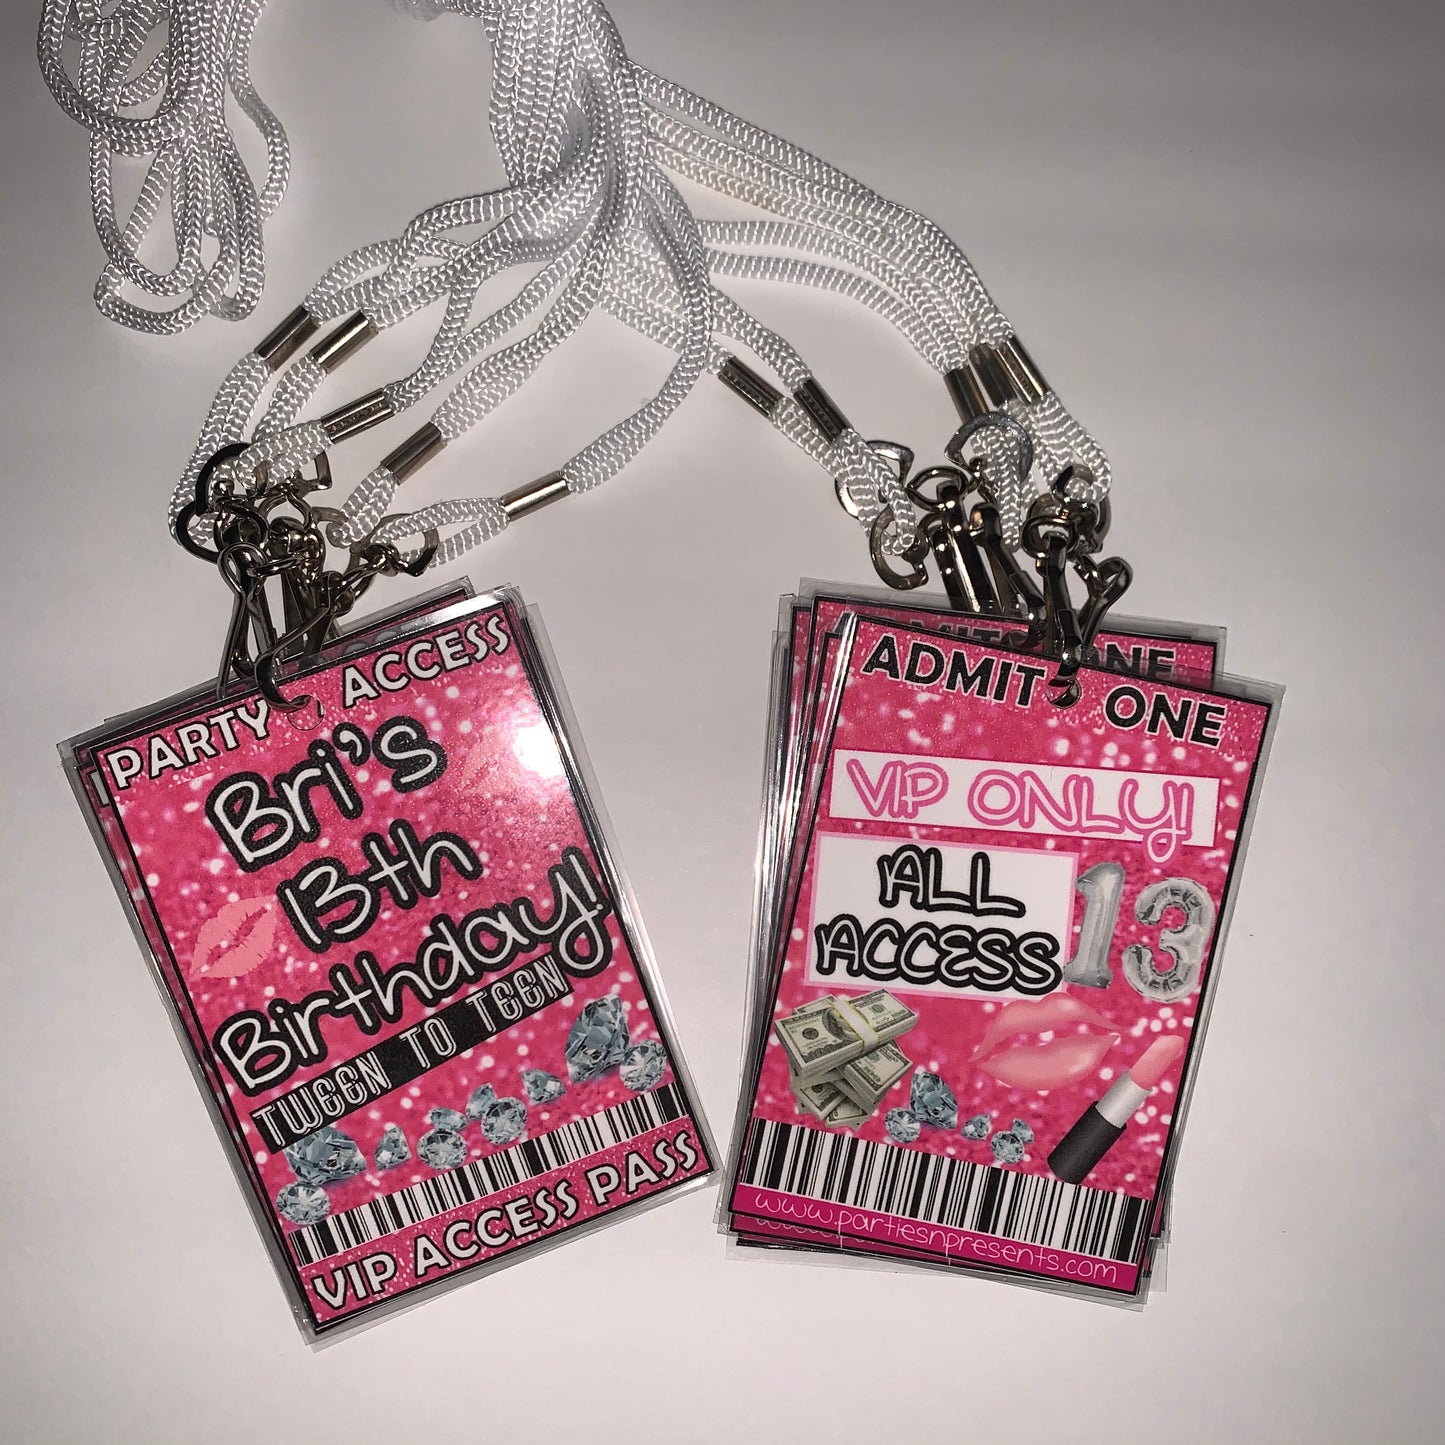 Exclusive VIP Party Passes